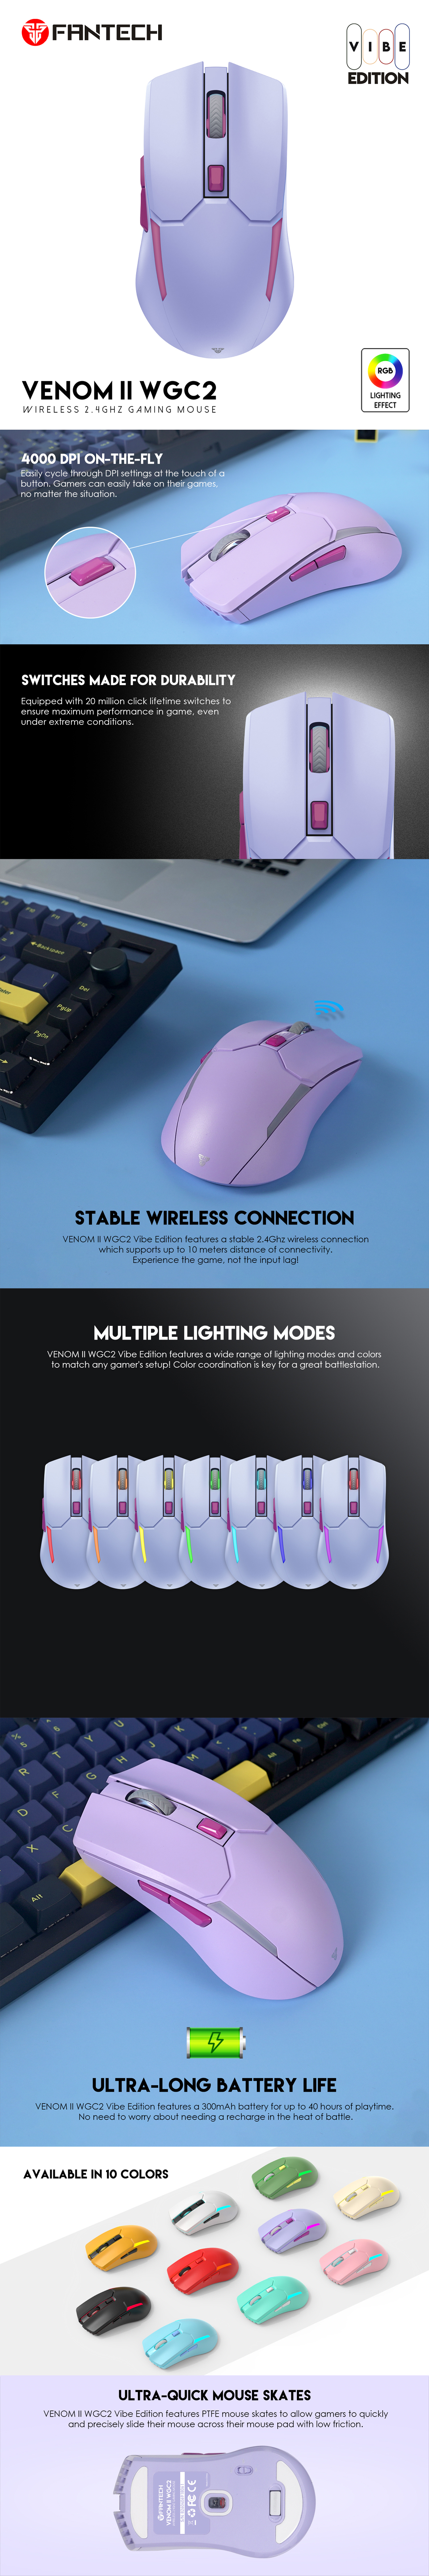 A large marketing image providing additional information about the product Fantech VENOM II WGC2 Wireless Gaming Mouse - Purple - Additional alt info not provided